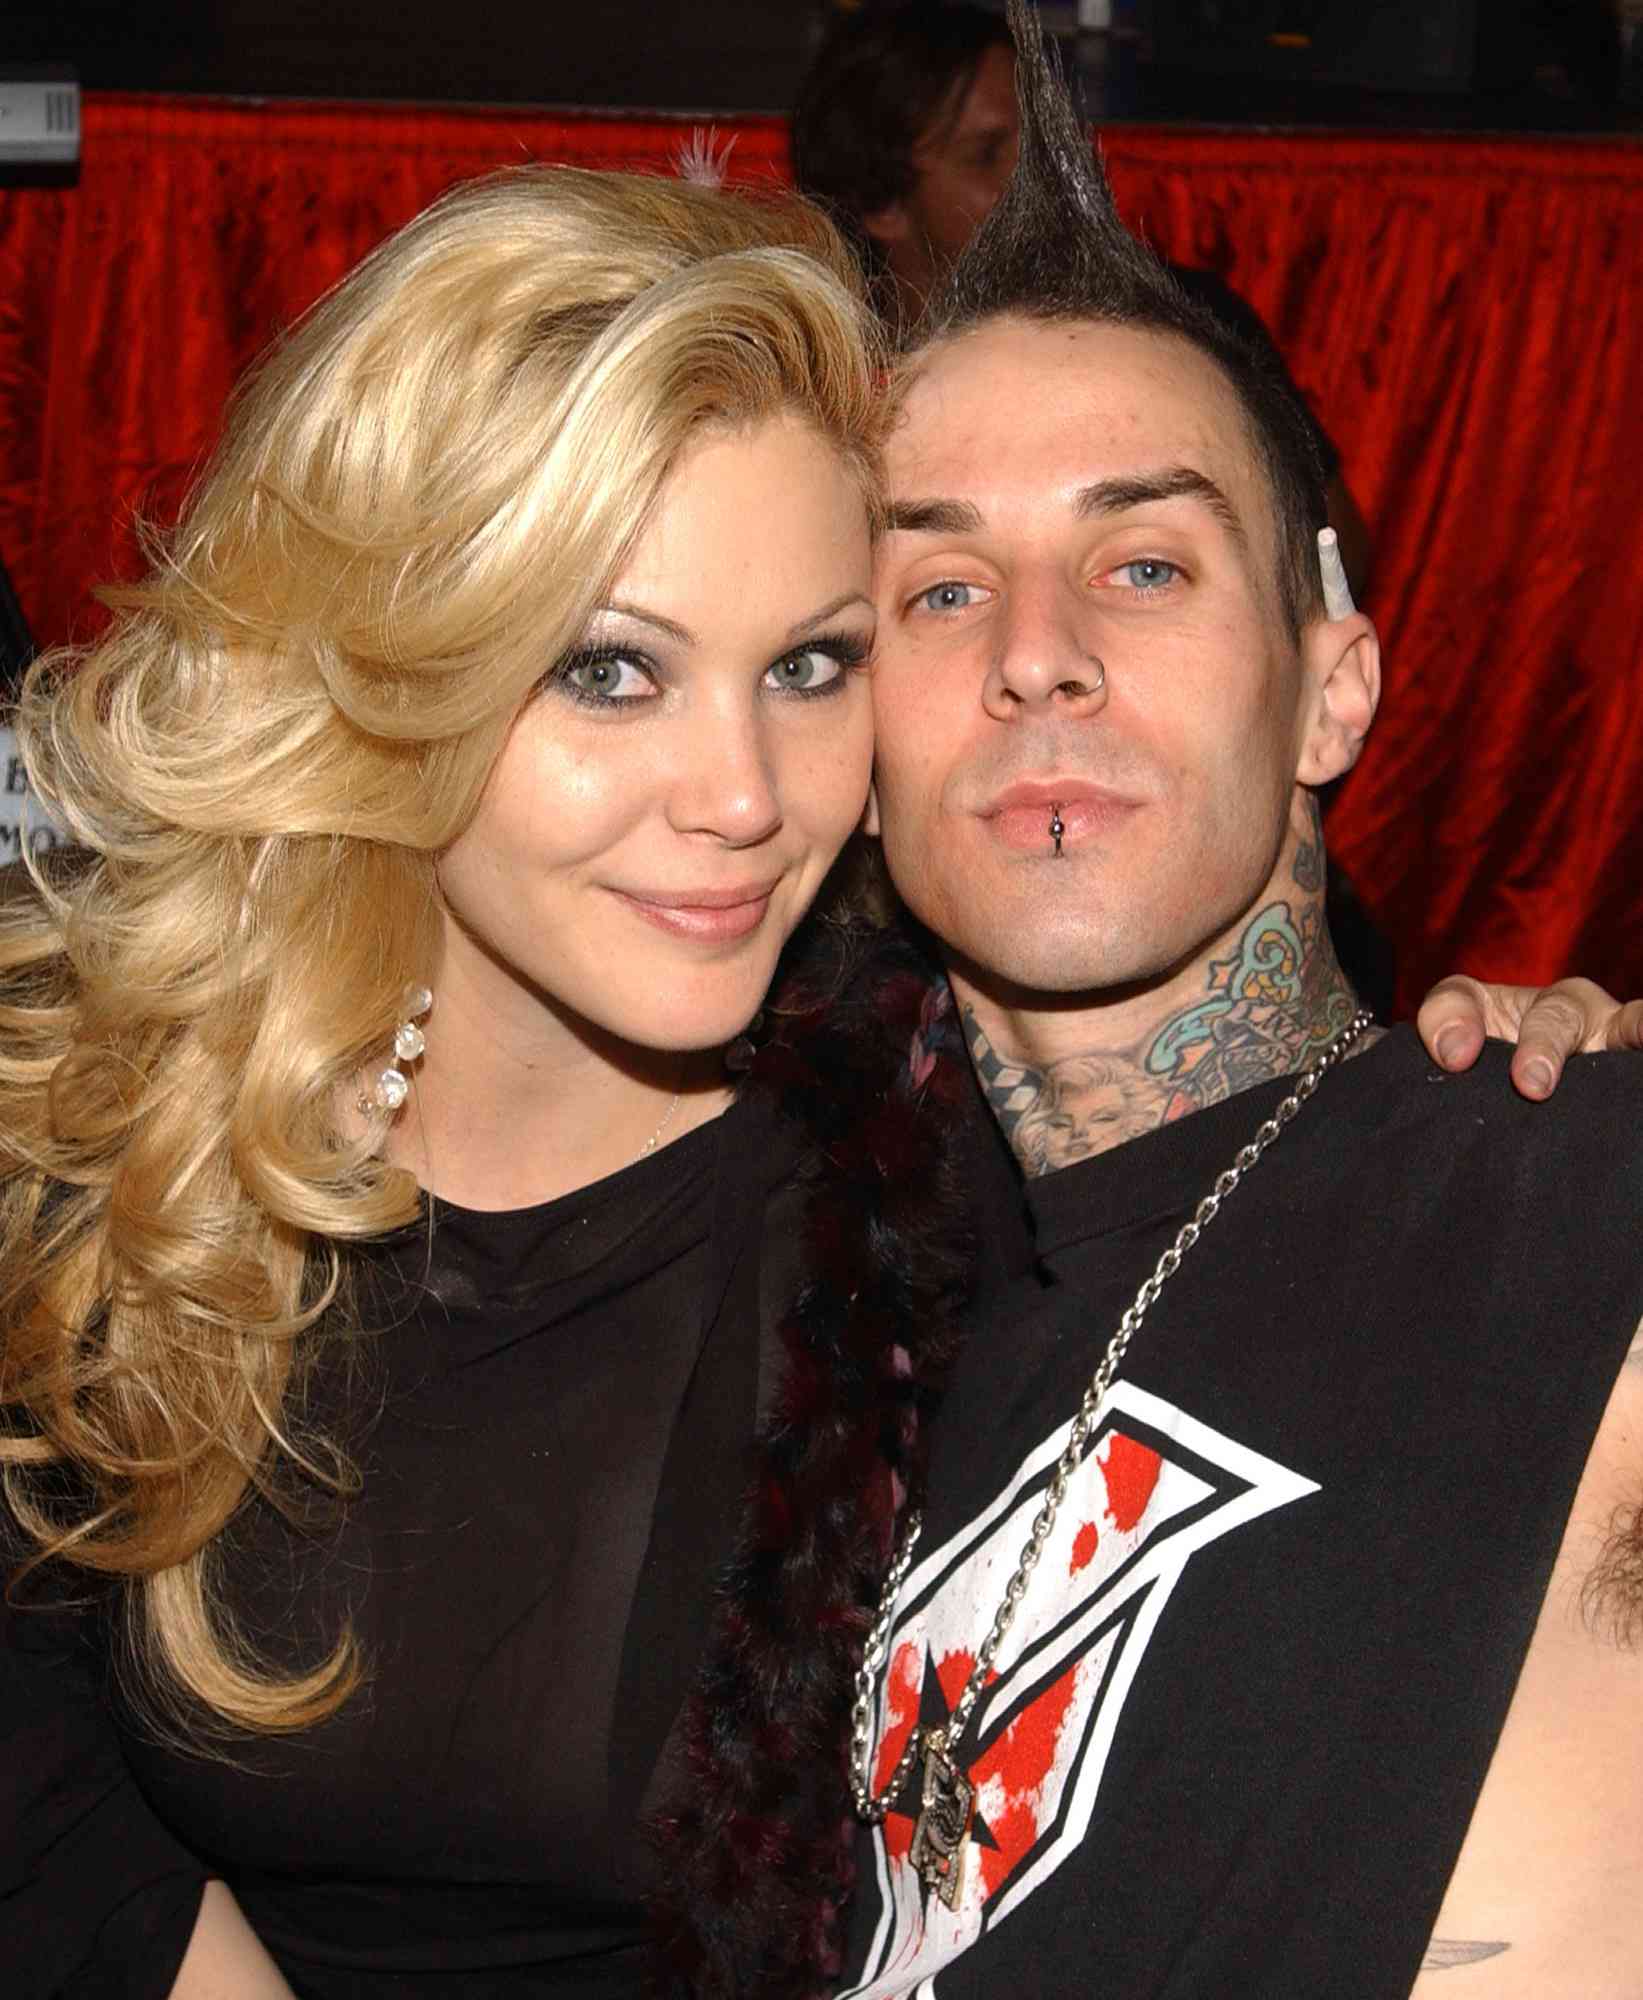 Shanna Moakler and Travis Barker during Beachers Comedy Madhouse in 2004